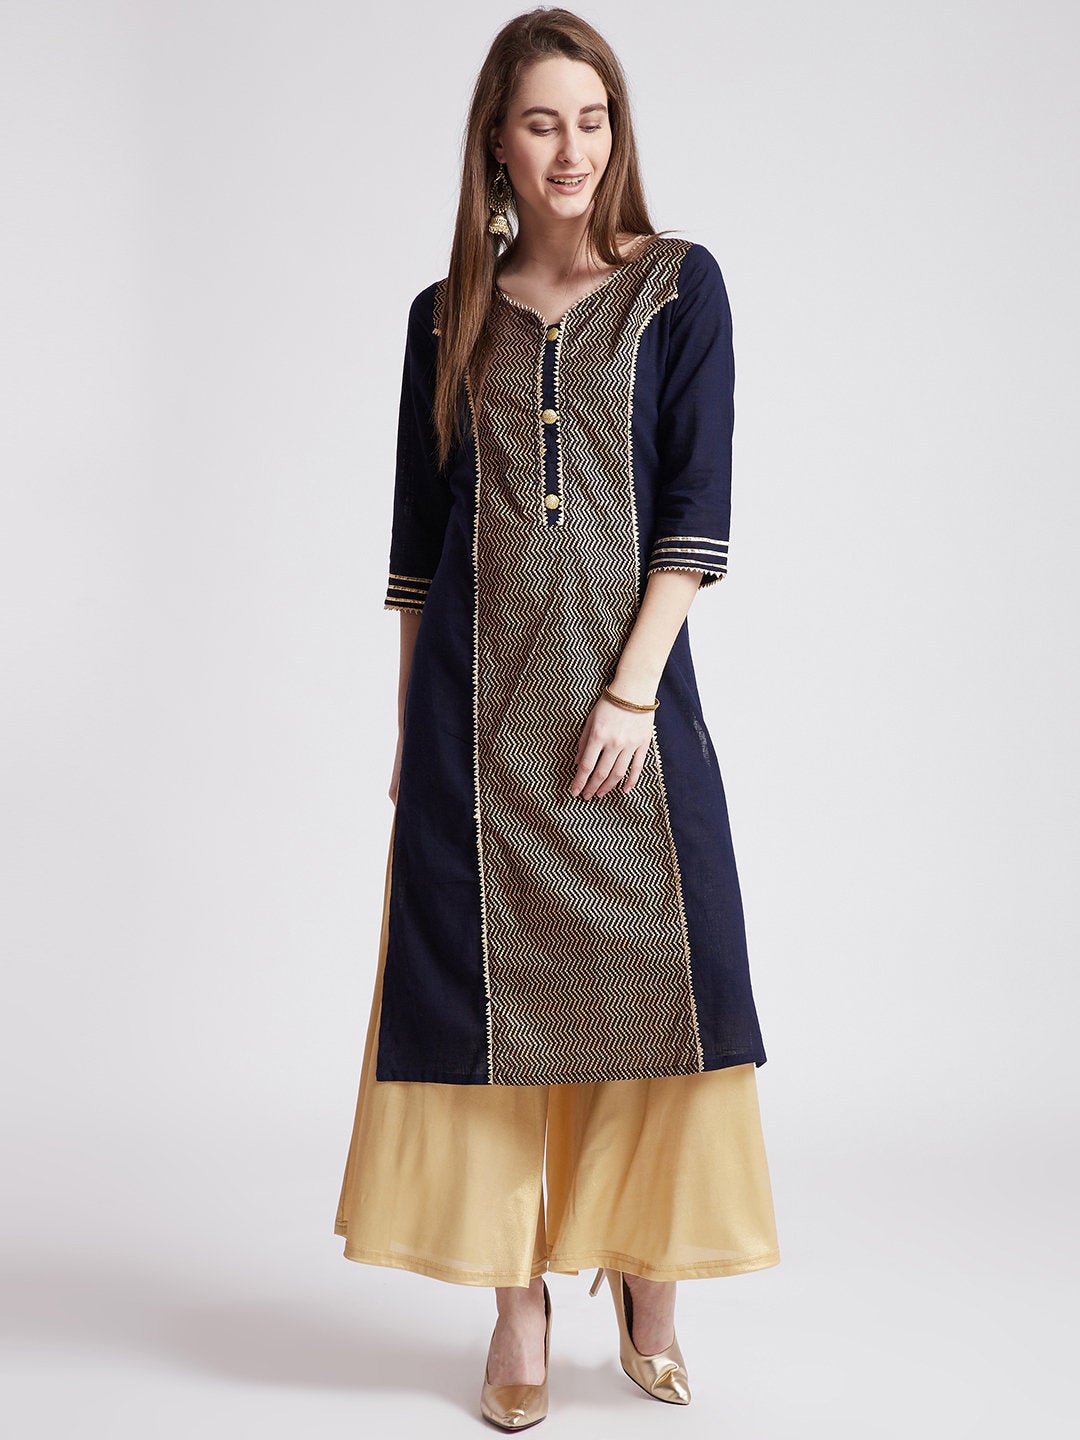 Indian ethnic long kurta in navy blue colour with gota detailing